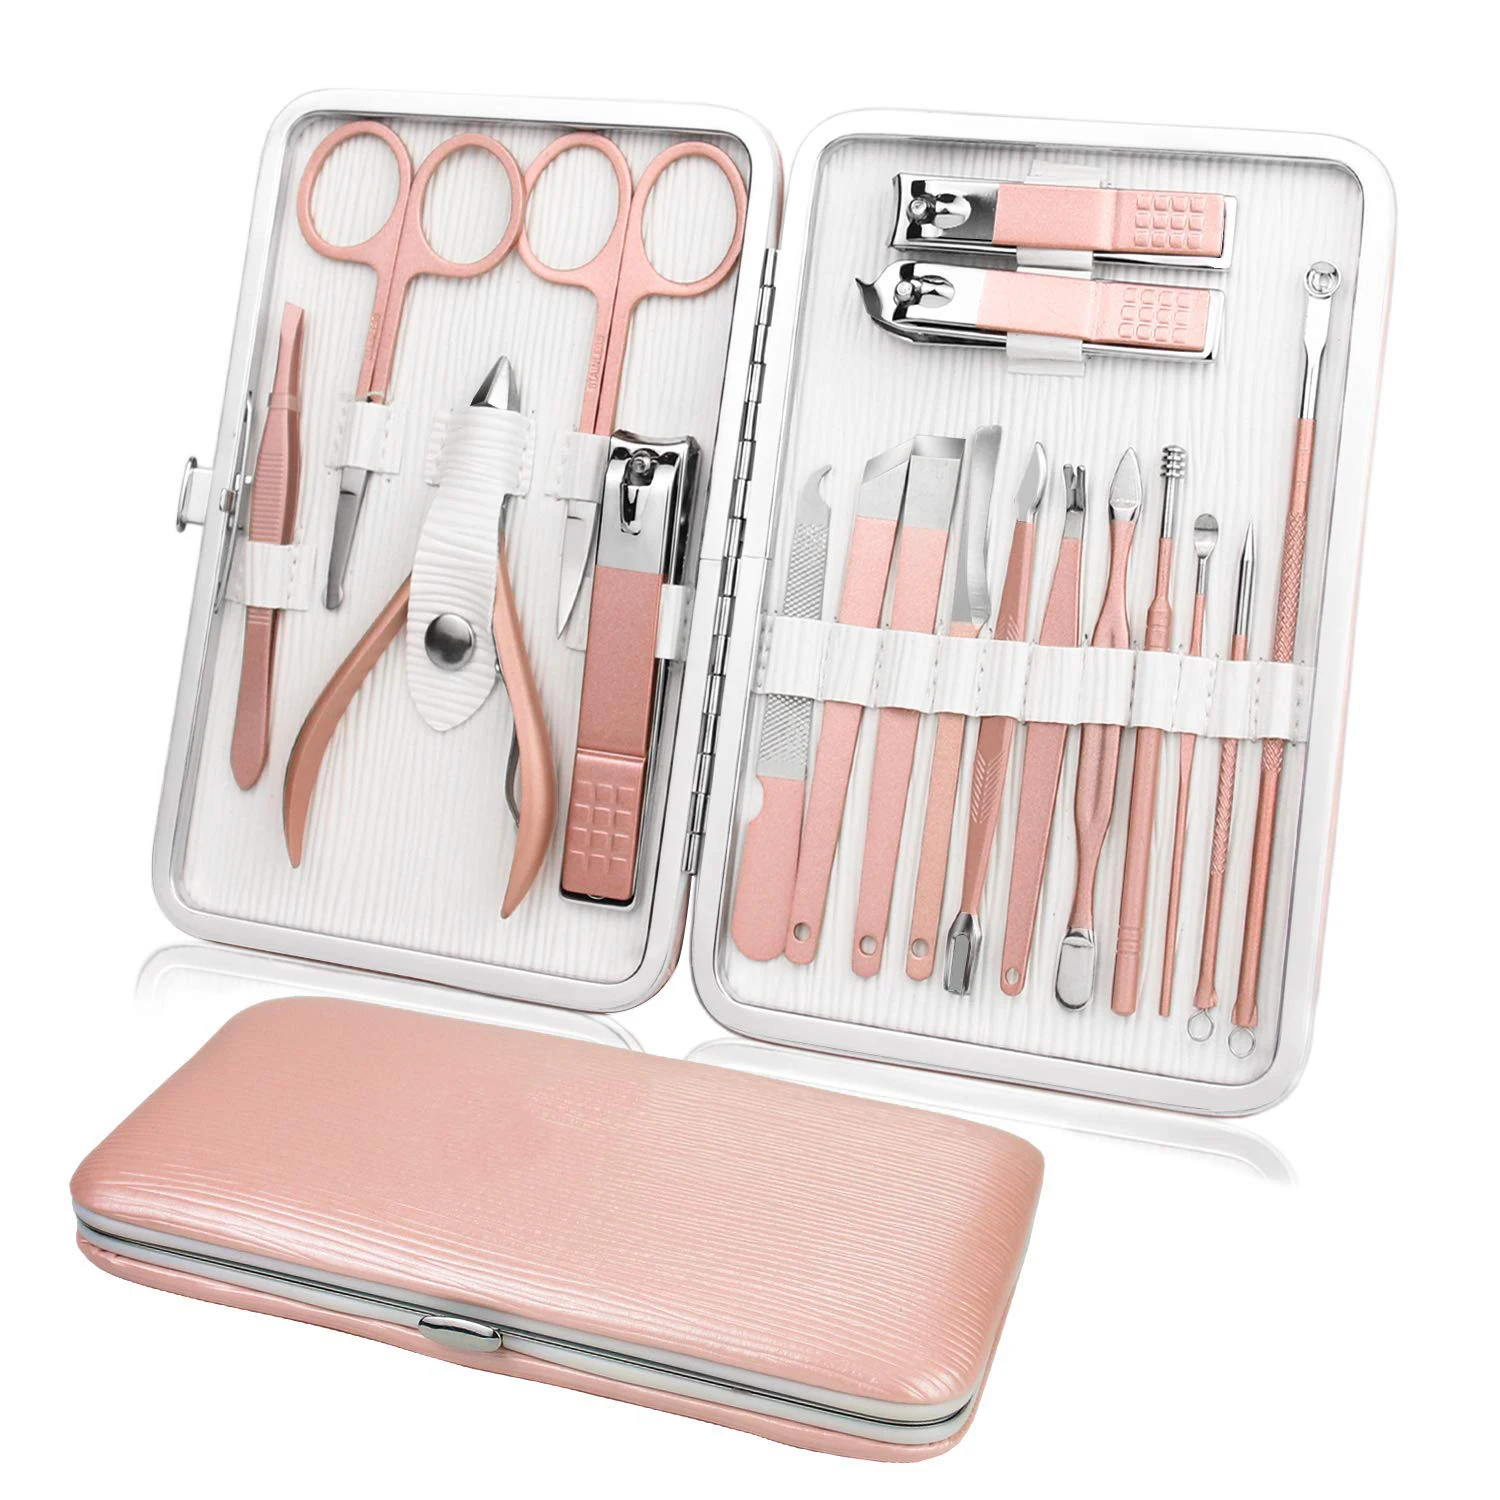 stijfheid Opheldering alarm Manicure Pedicure Set Travel Professional Stainless Steel Nail Care Kits  With Leather Case - Buy Manicure Pedicure Set Travel,Nail Care Kits,Manicure  Pedicure Set With Leather Case Product on Alibaba.com